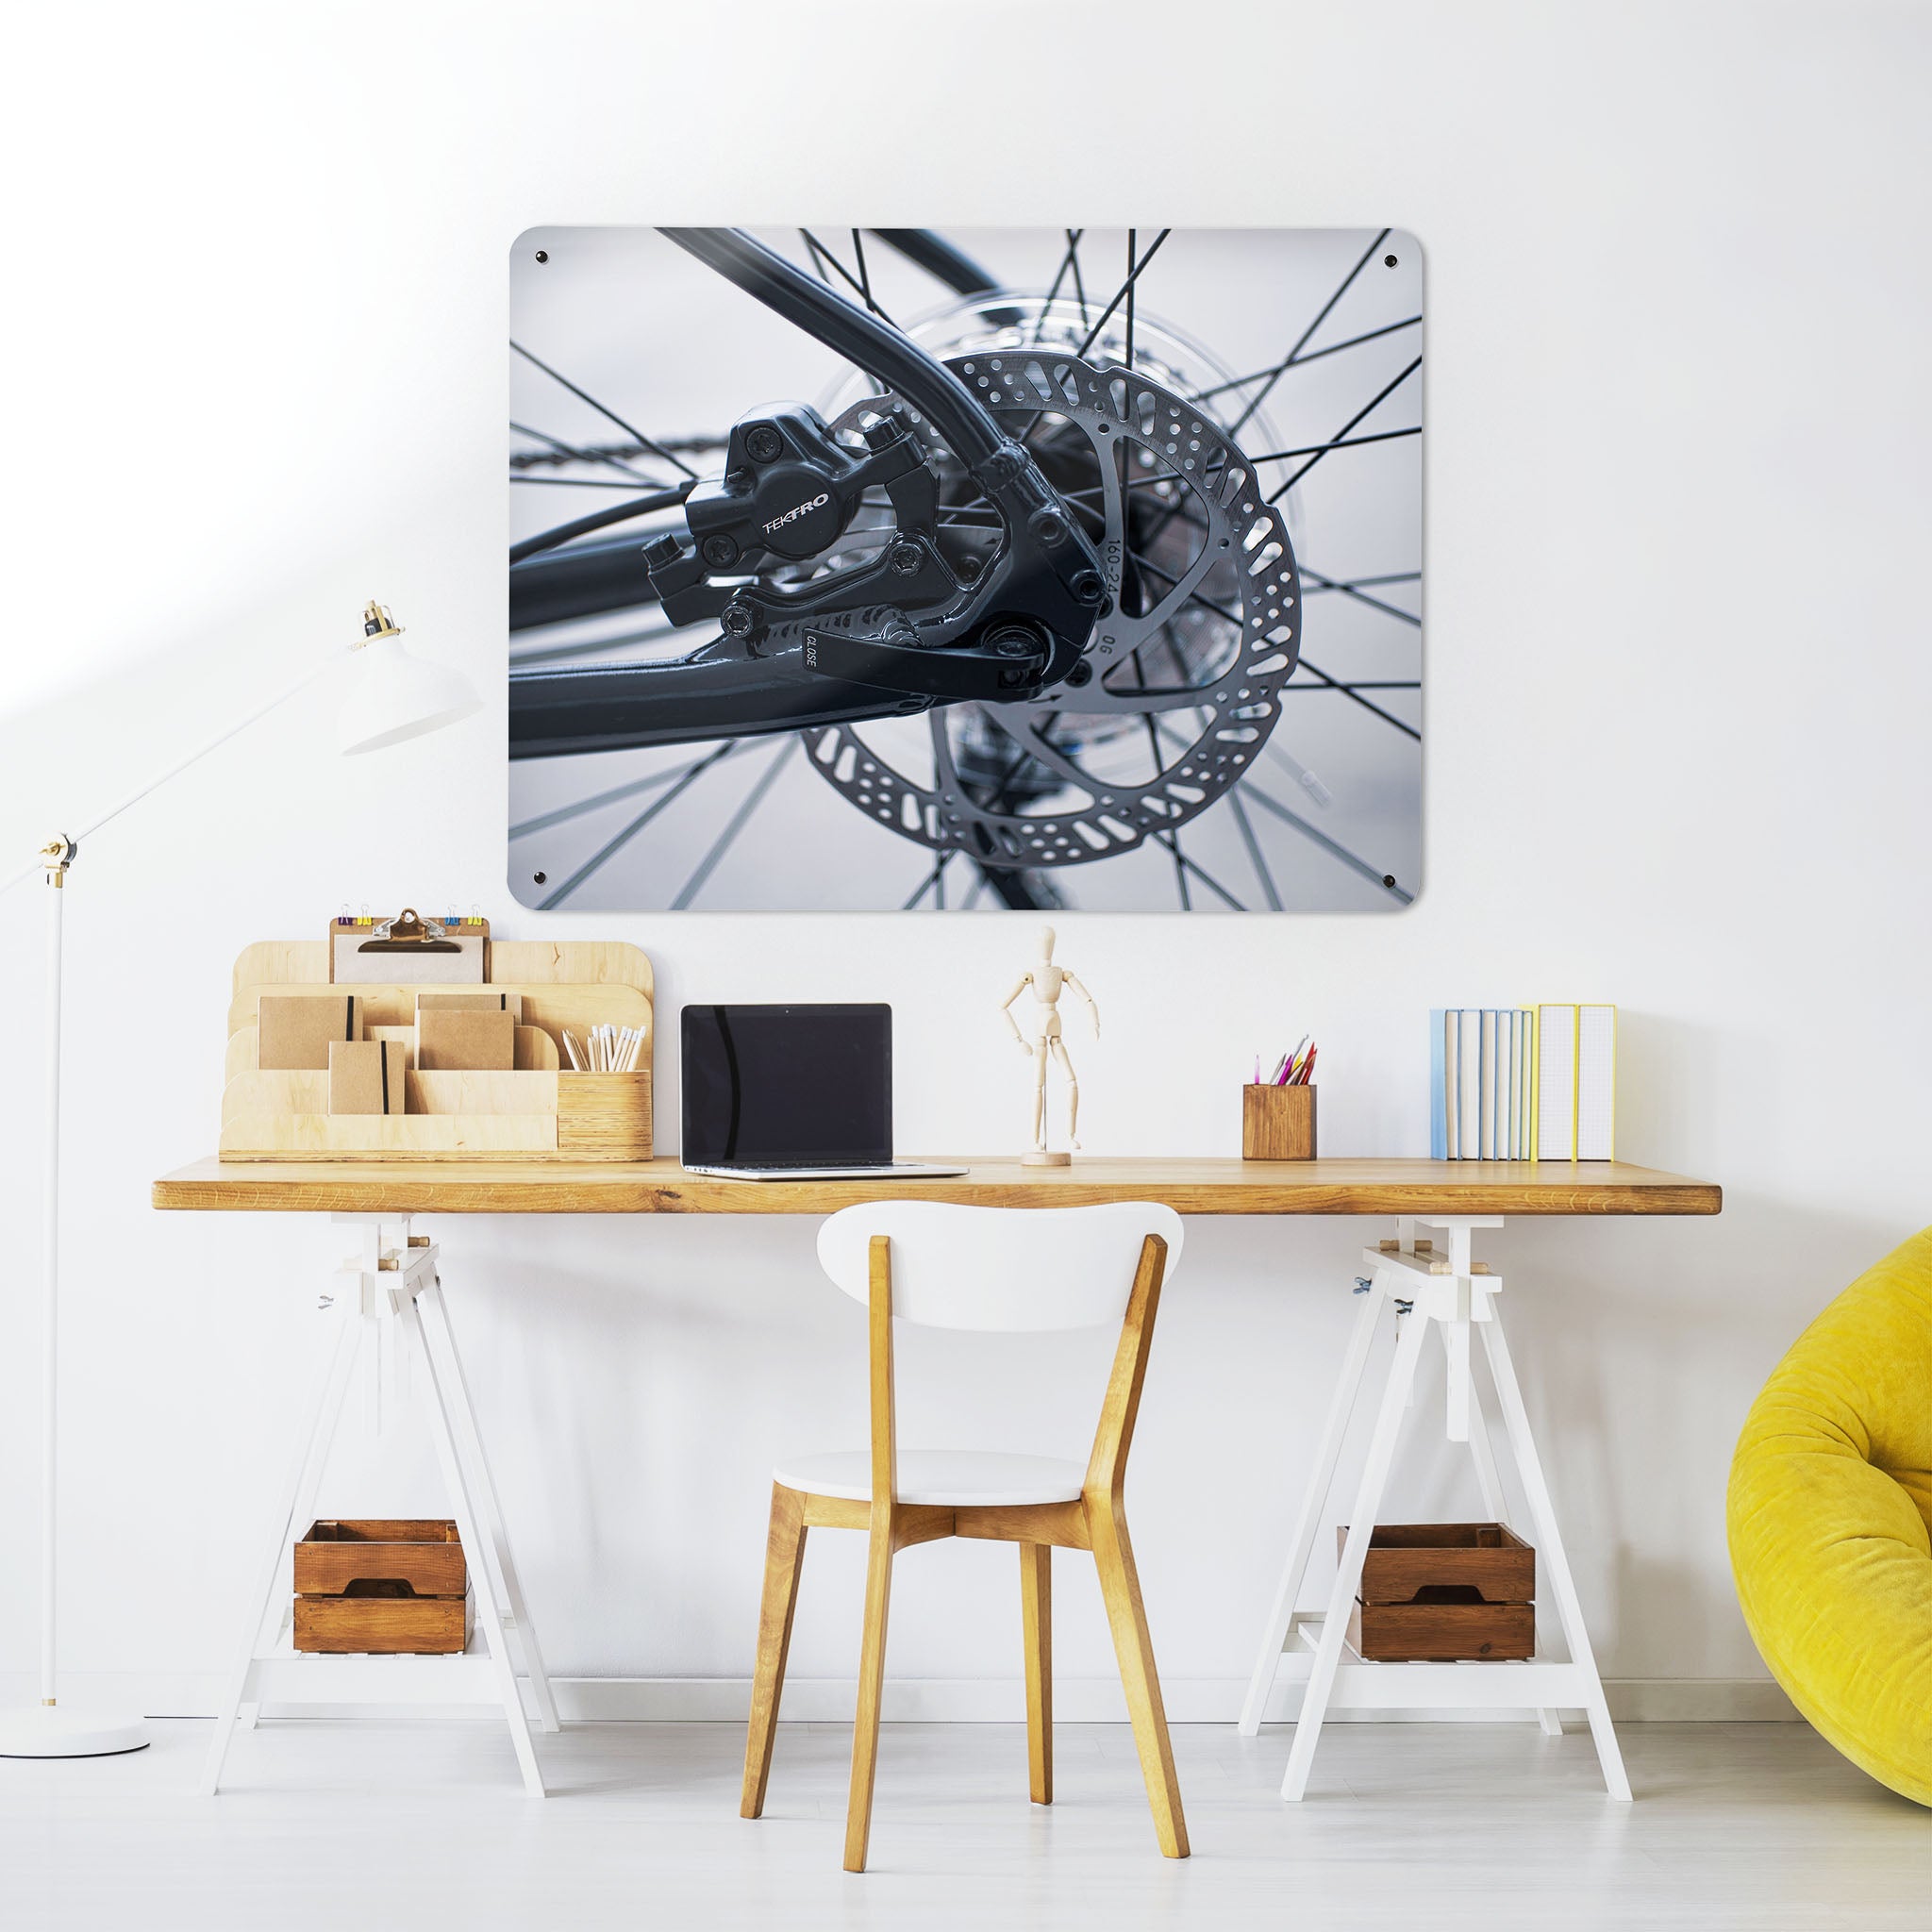 A desk in a workspace setting in a white interior with a magnetic metal wall art panel showing a black and white photograph of bicycle spokes